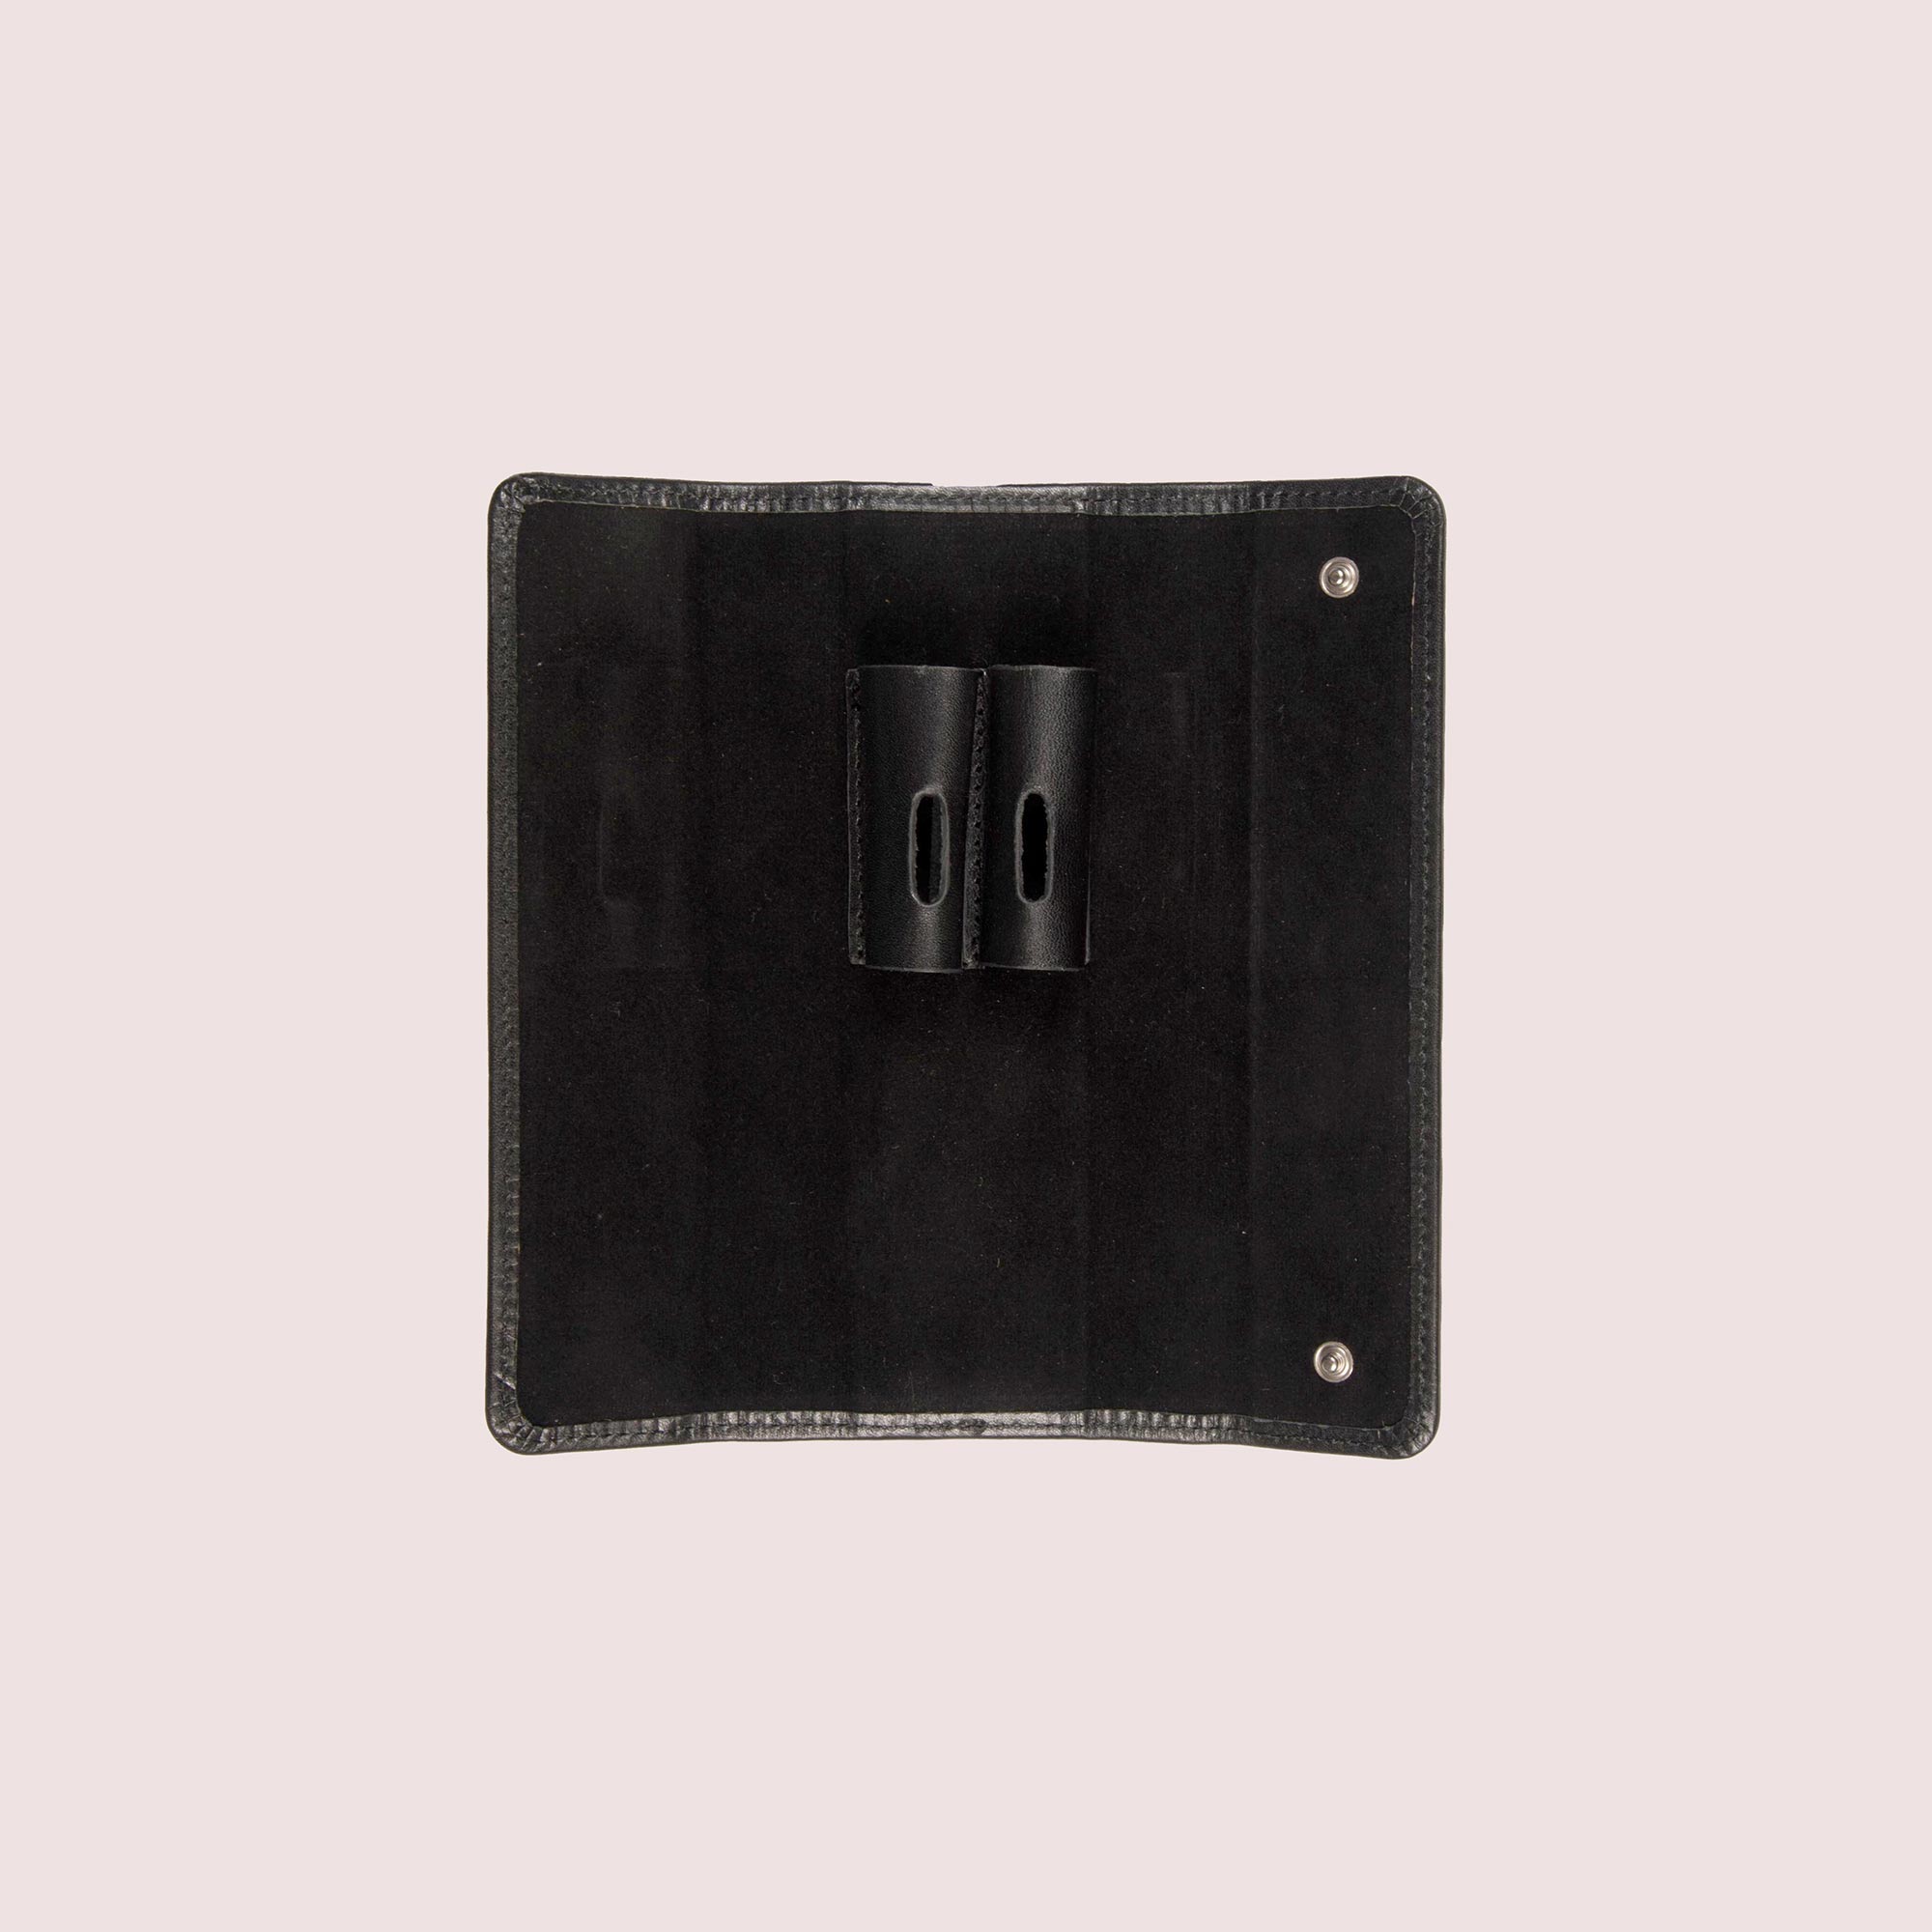 Fold Pen Case with 2 Slots